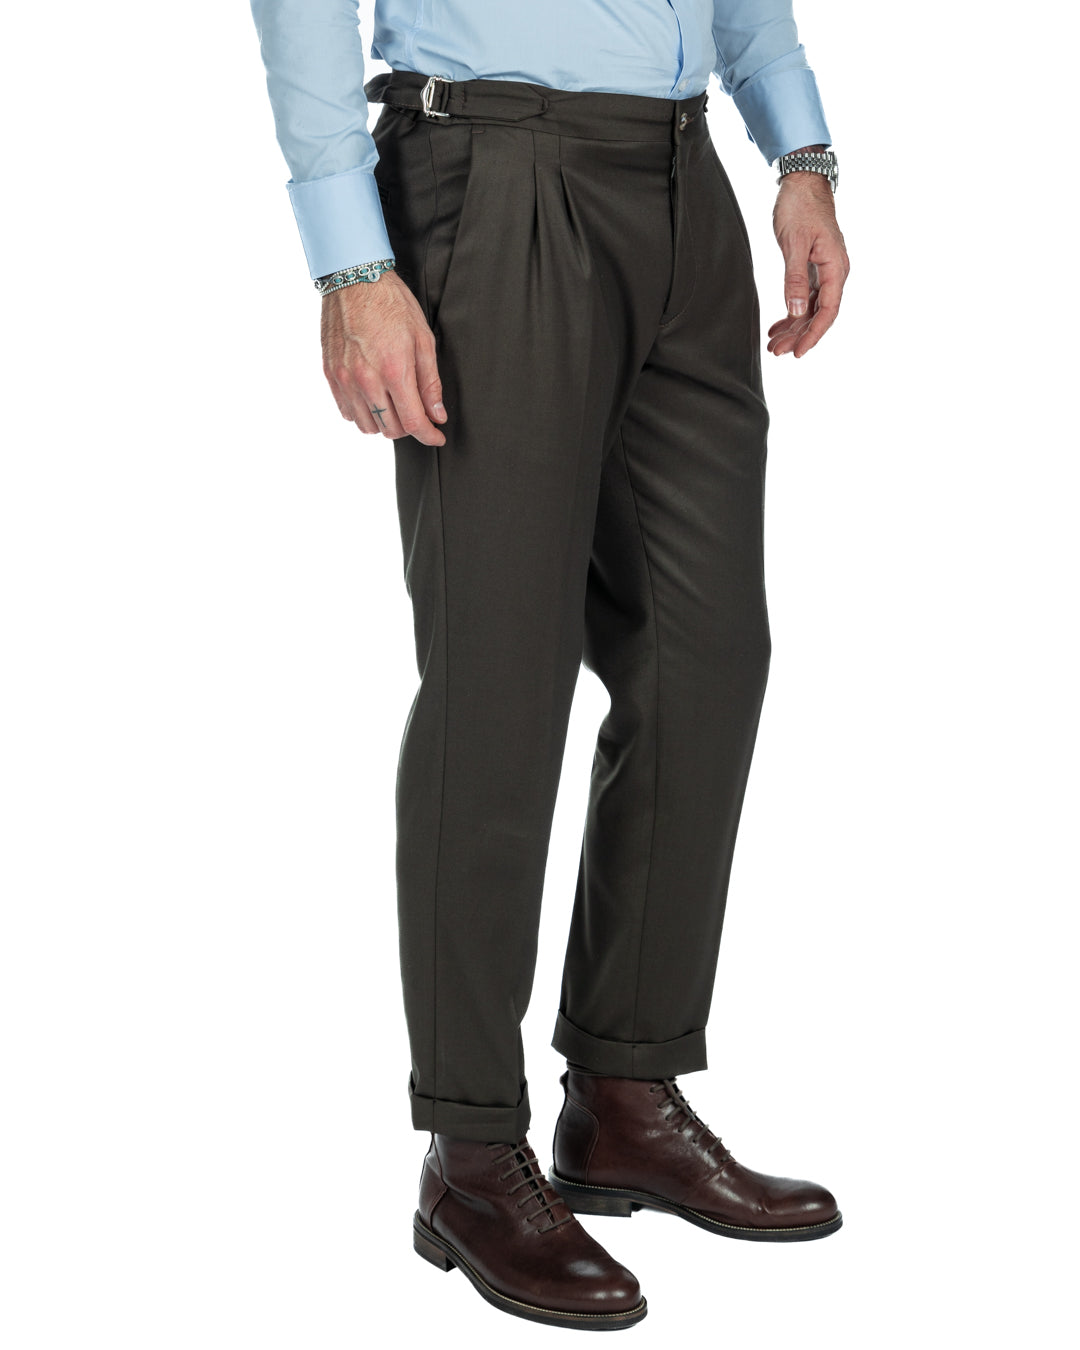 Otranto - green trousers with buckles and pleats